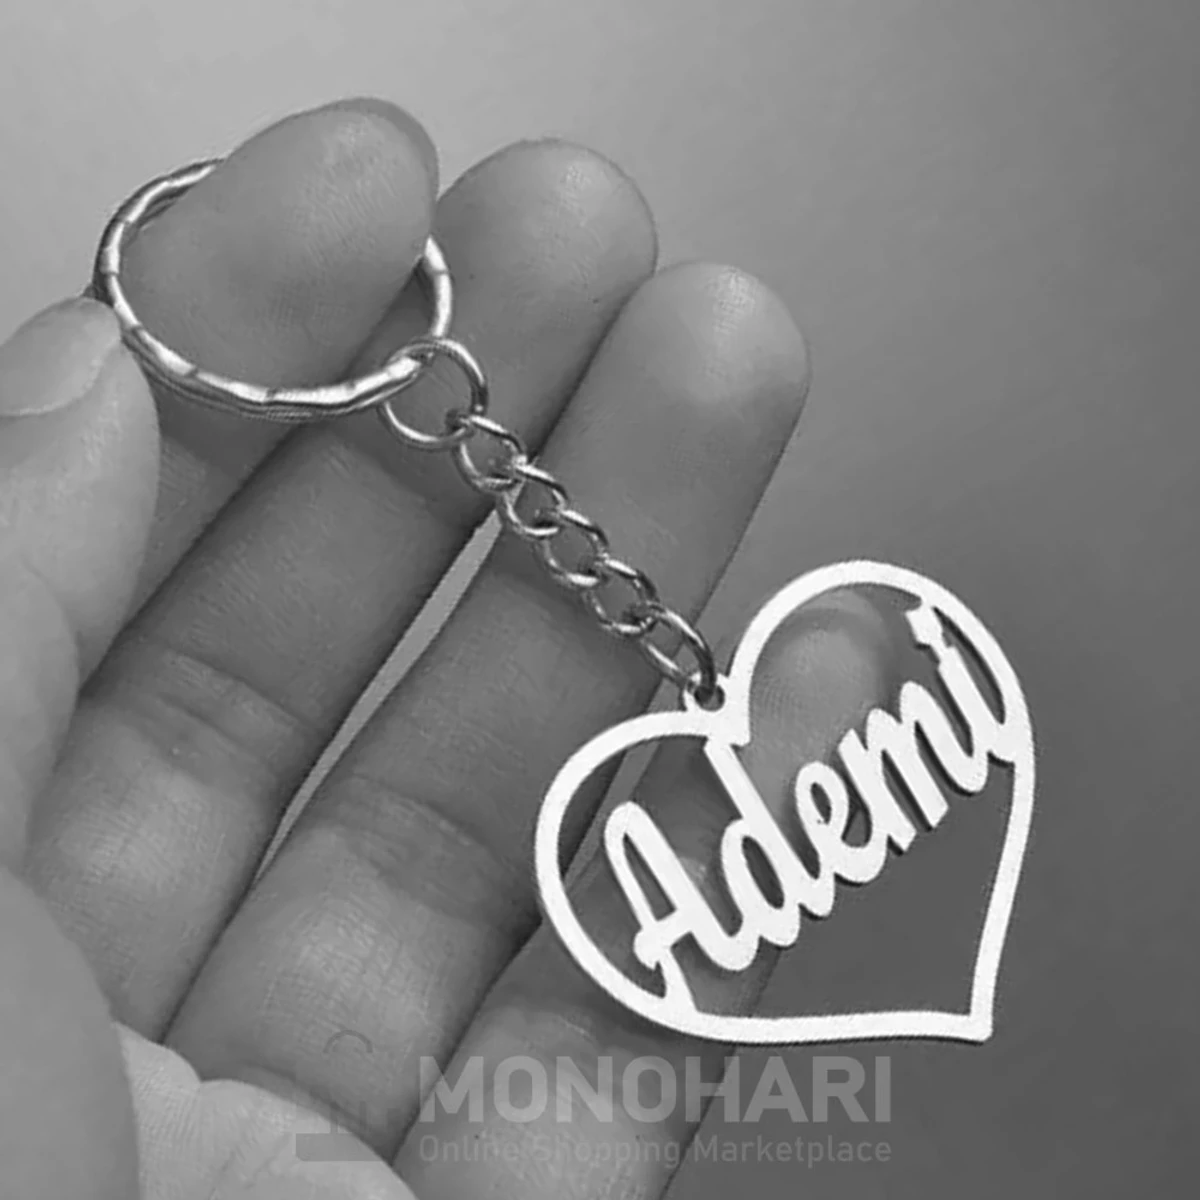 Single Name Key Ring (Ademi) Covered with Heart Shape 22K Gold Plated Customized Key Ring